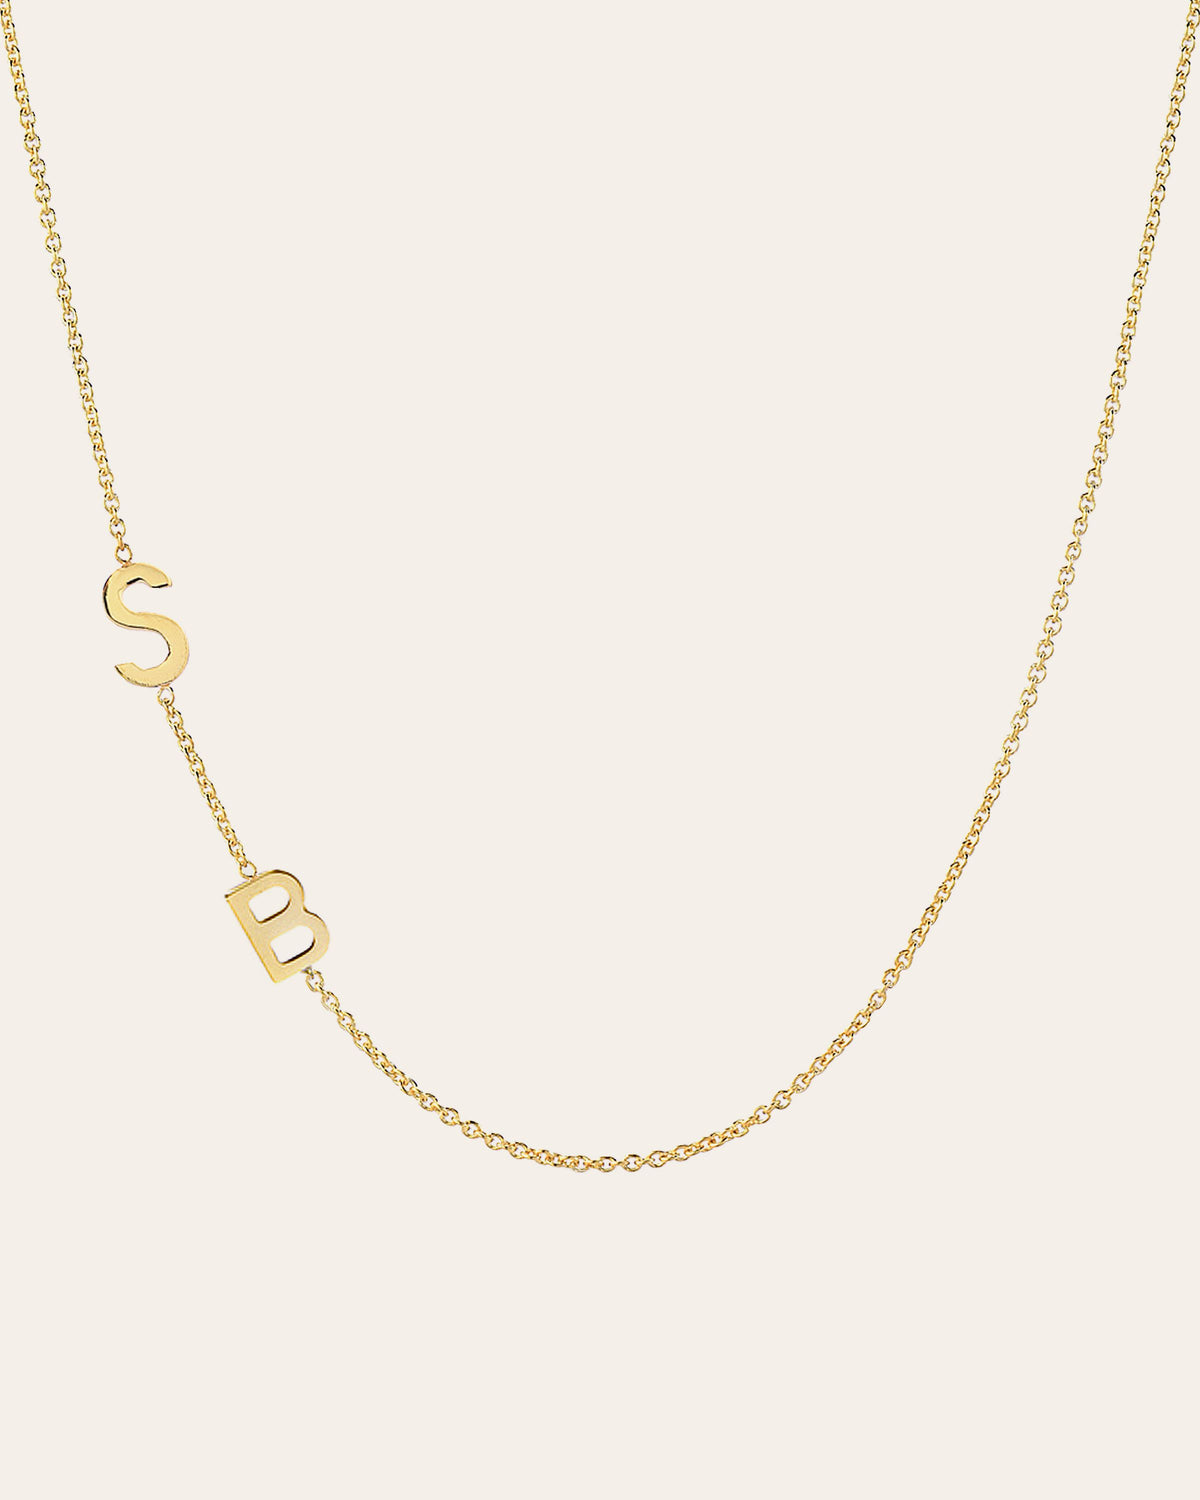 14k Gold Asymmetrical Multiple Initials Necklace